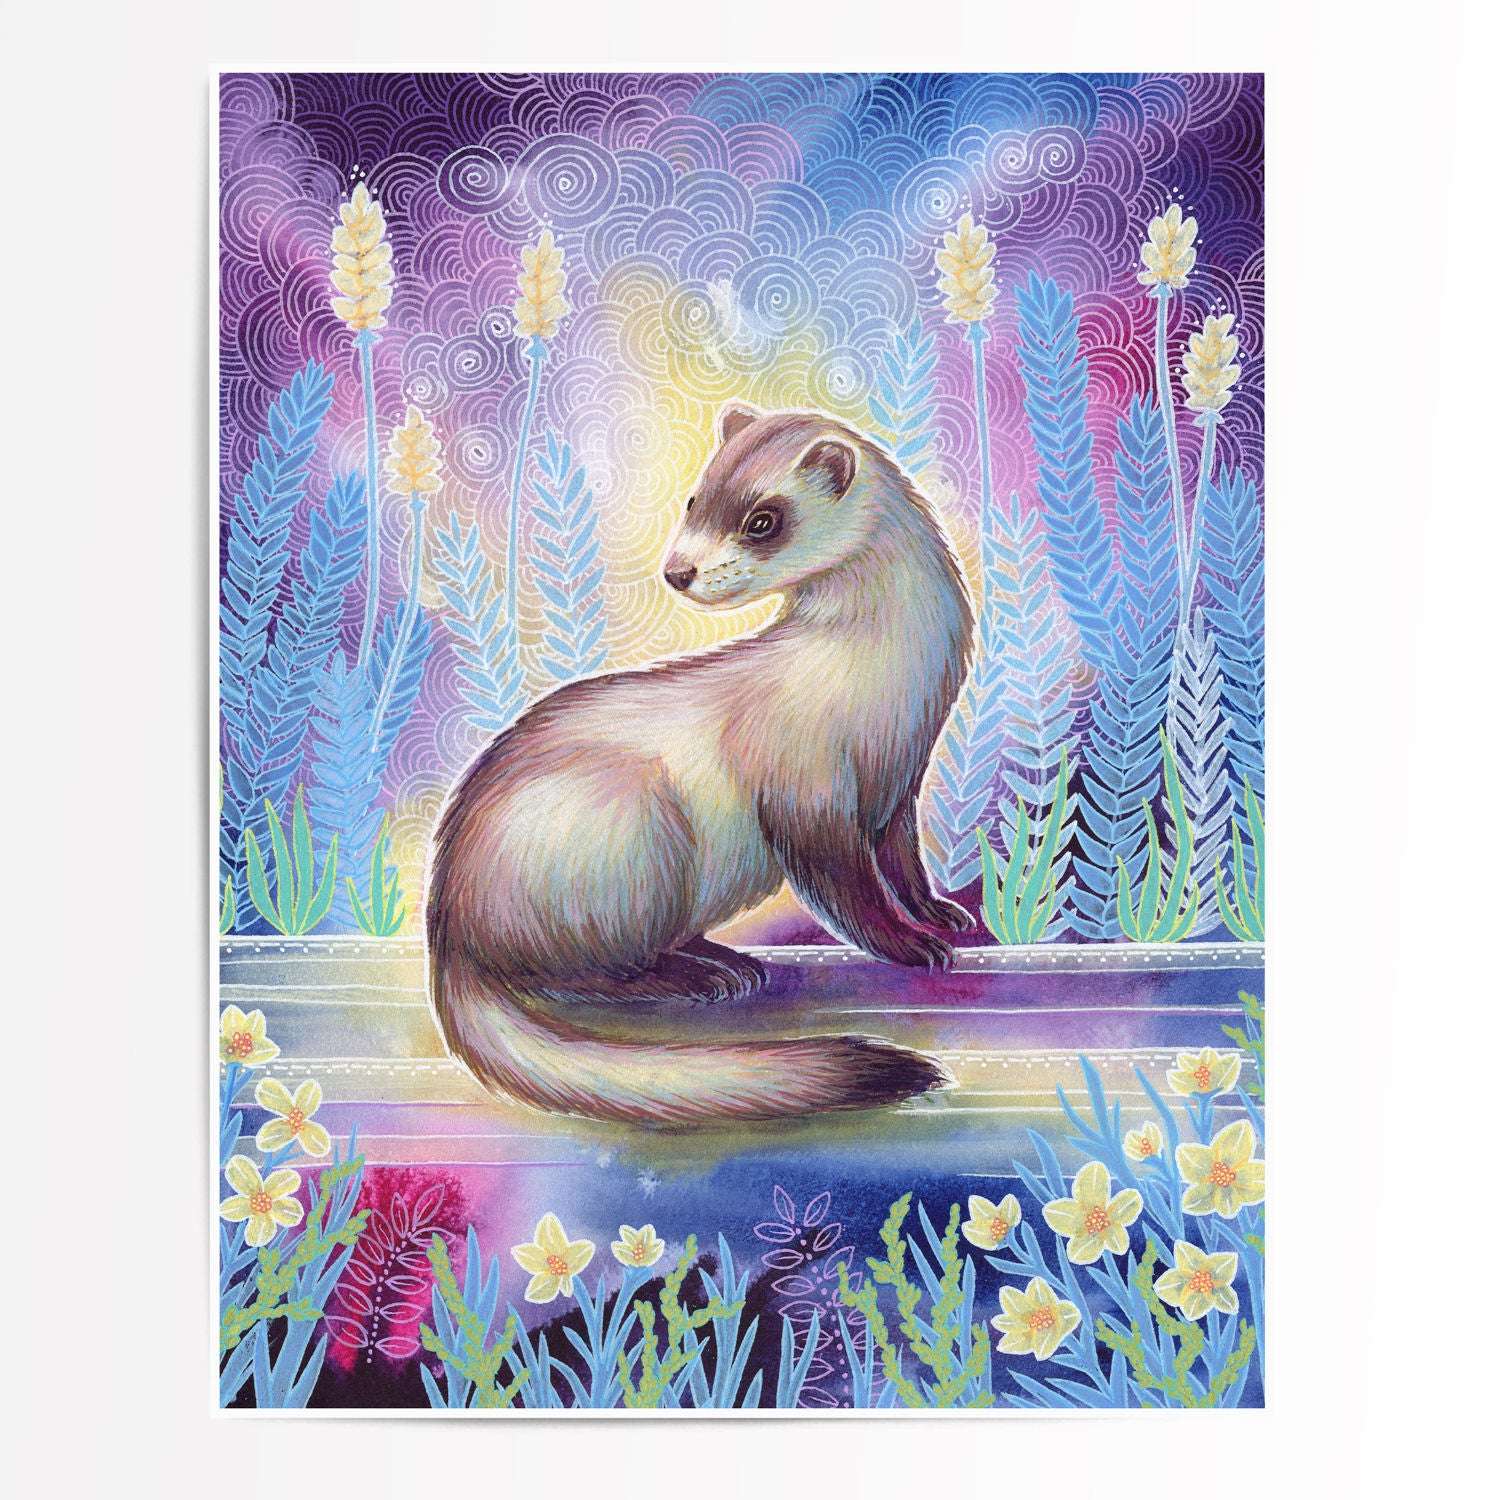 Illustration of The Ferret in a colorful, whimsical garden with detailed plants and a radiant, patterned sky.